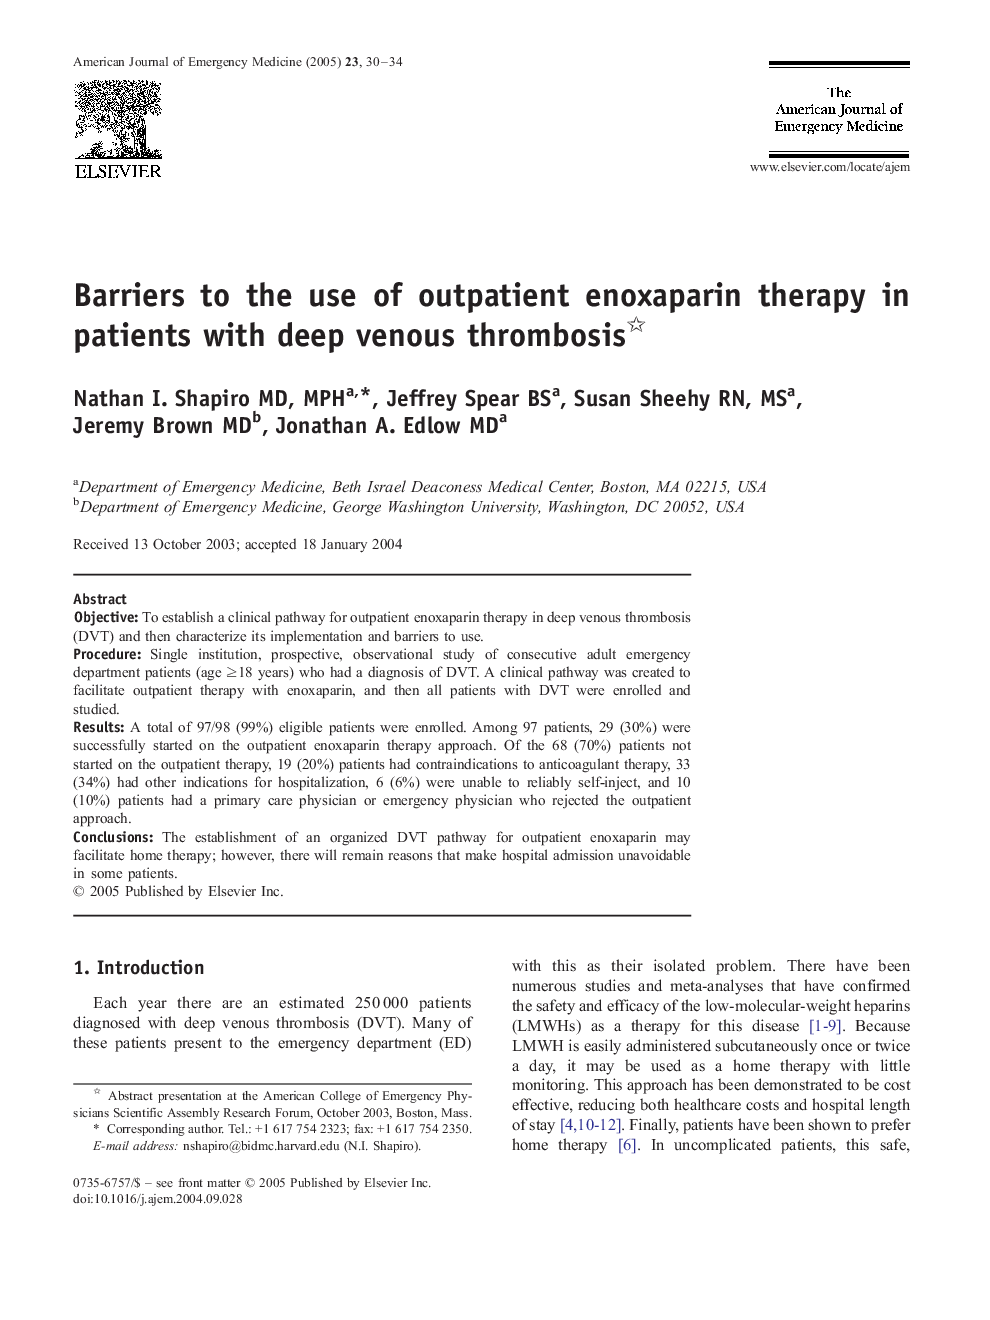 Barriers to the use of outpatient enoxaparin therapy in patients with deep venous thrombosis